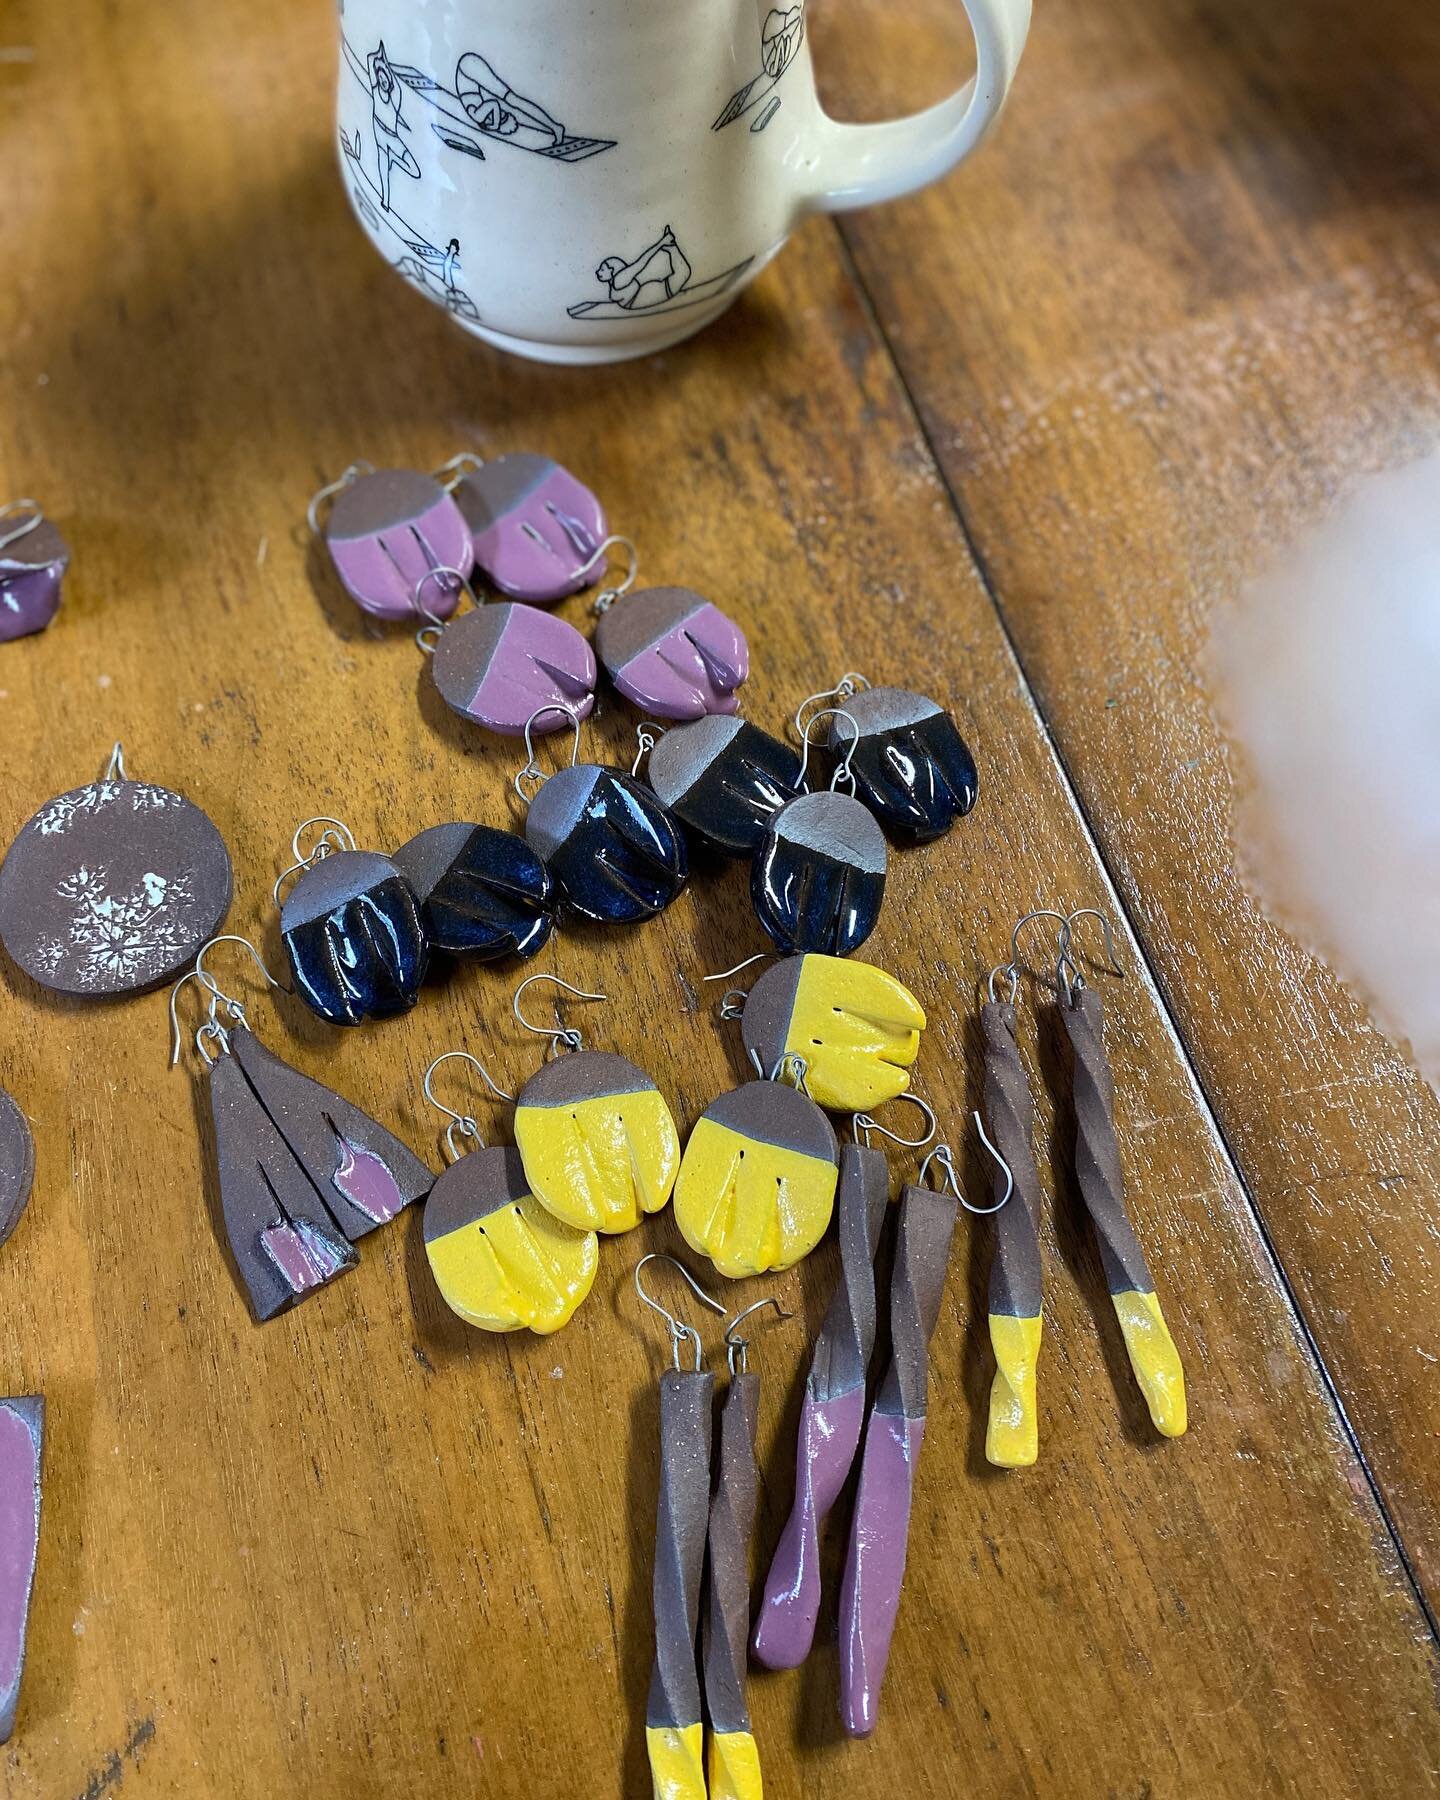 Some new sweet loves fresh from the glaze kiln, thanks to Teresa @heatherwoodfarm (and a surprise appearance from @pipedreampottery in the background 😘)!
Did some assembly yesterday, these have titanium hooks and the wall piece leather cord. Keep yo